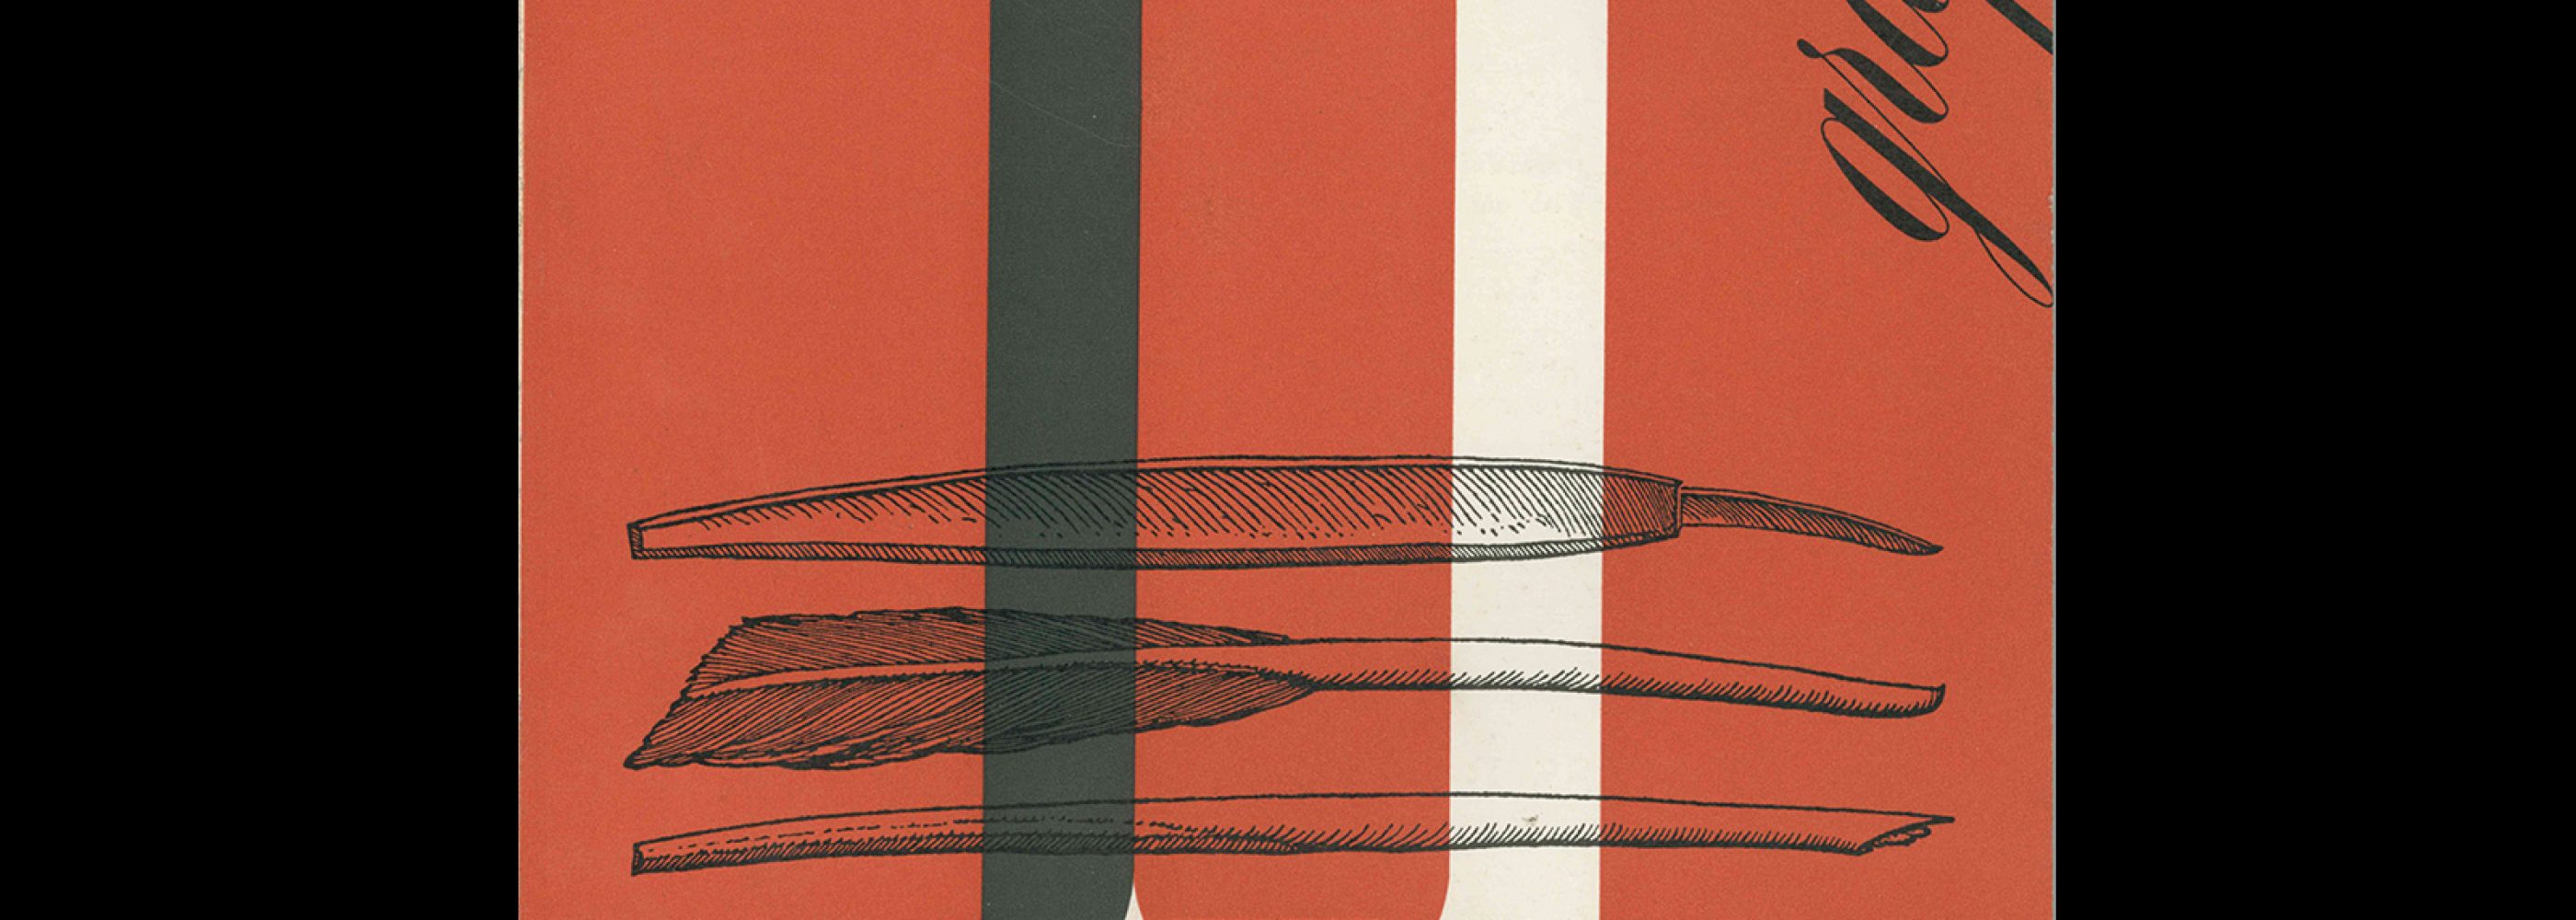 Graphis 15, 1946. Cover design by Paul Sollberger